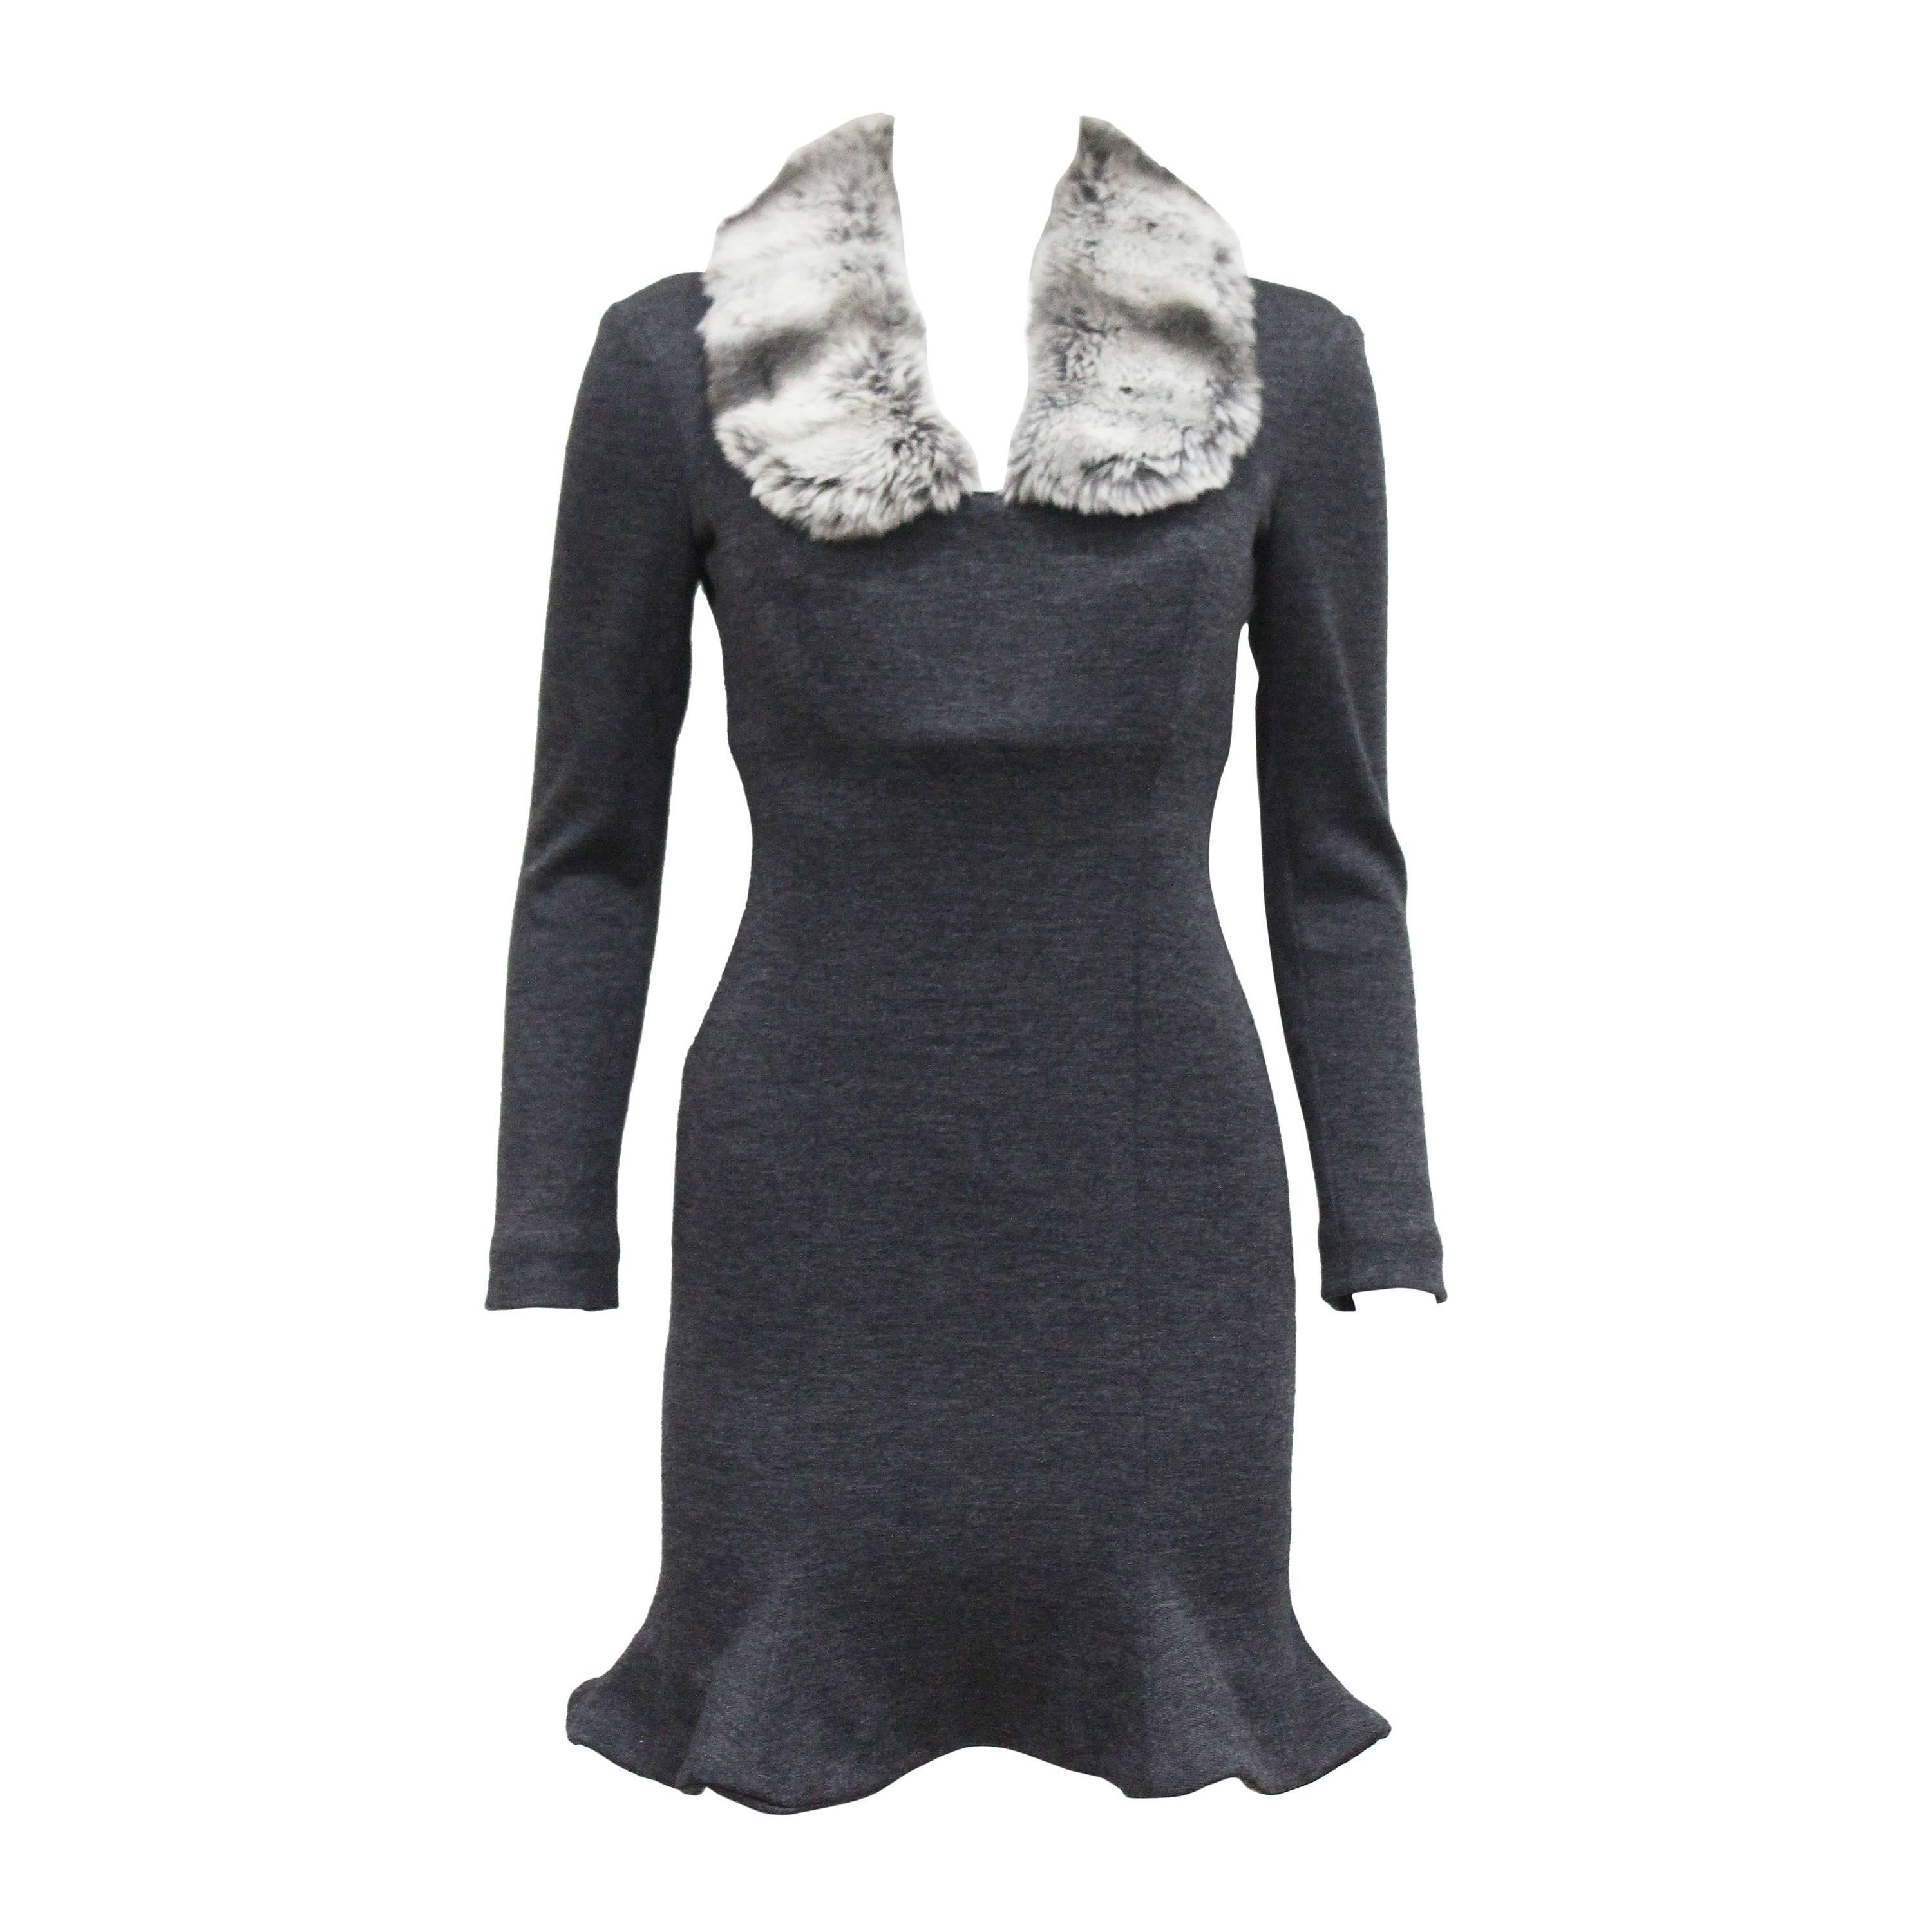 Vivienne Westwood Corseted Woollen Dress With Faux Fur Collar, c 1990s